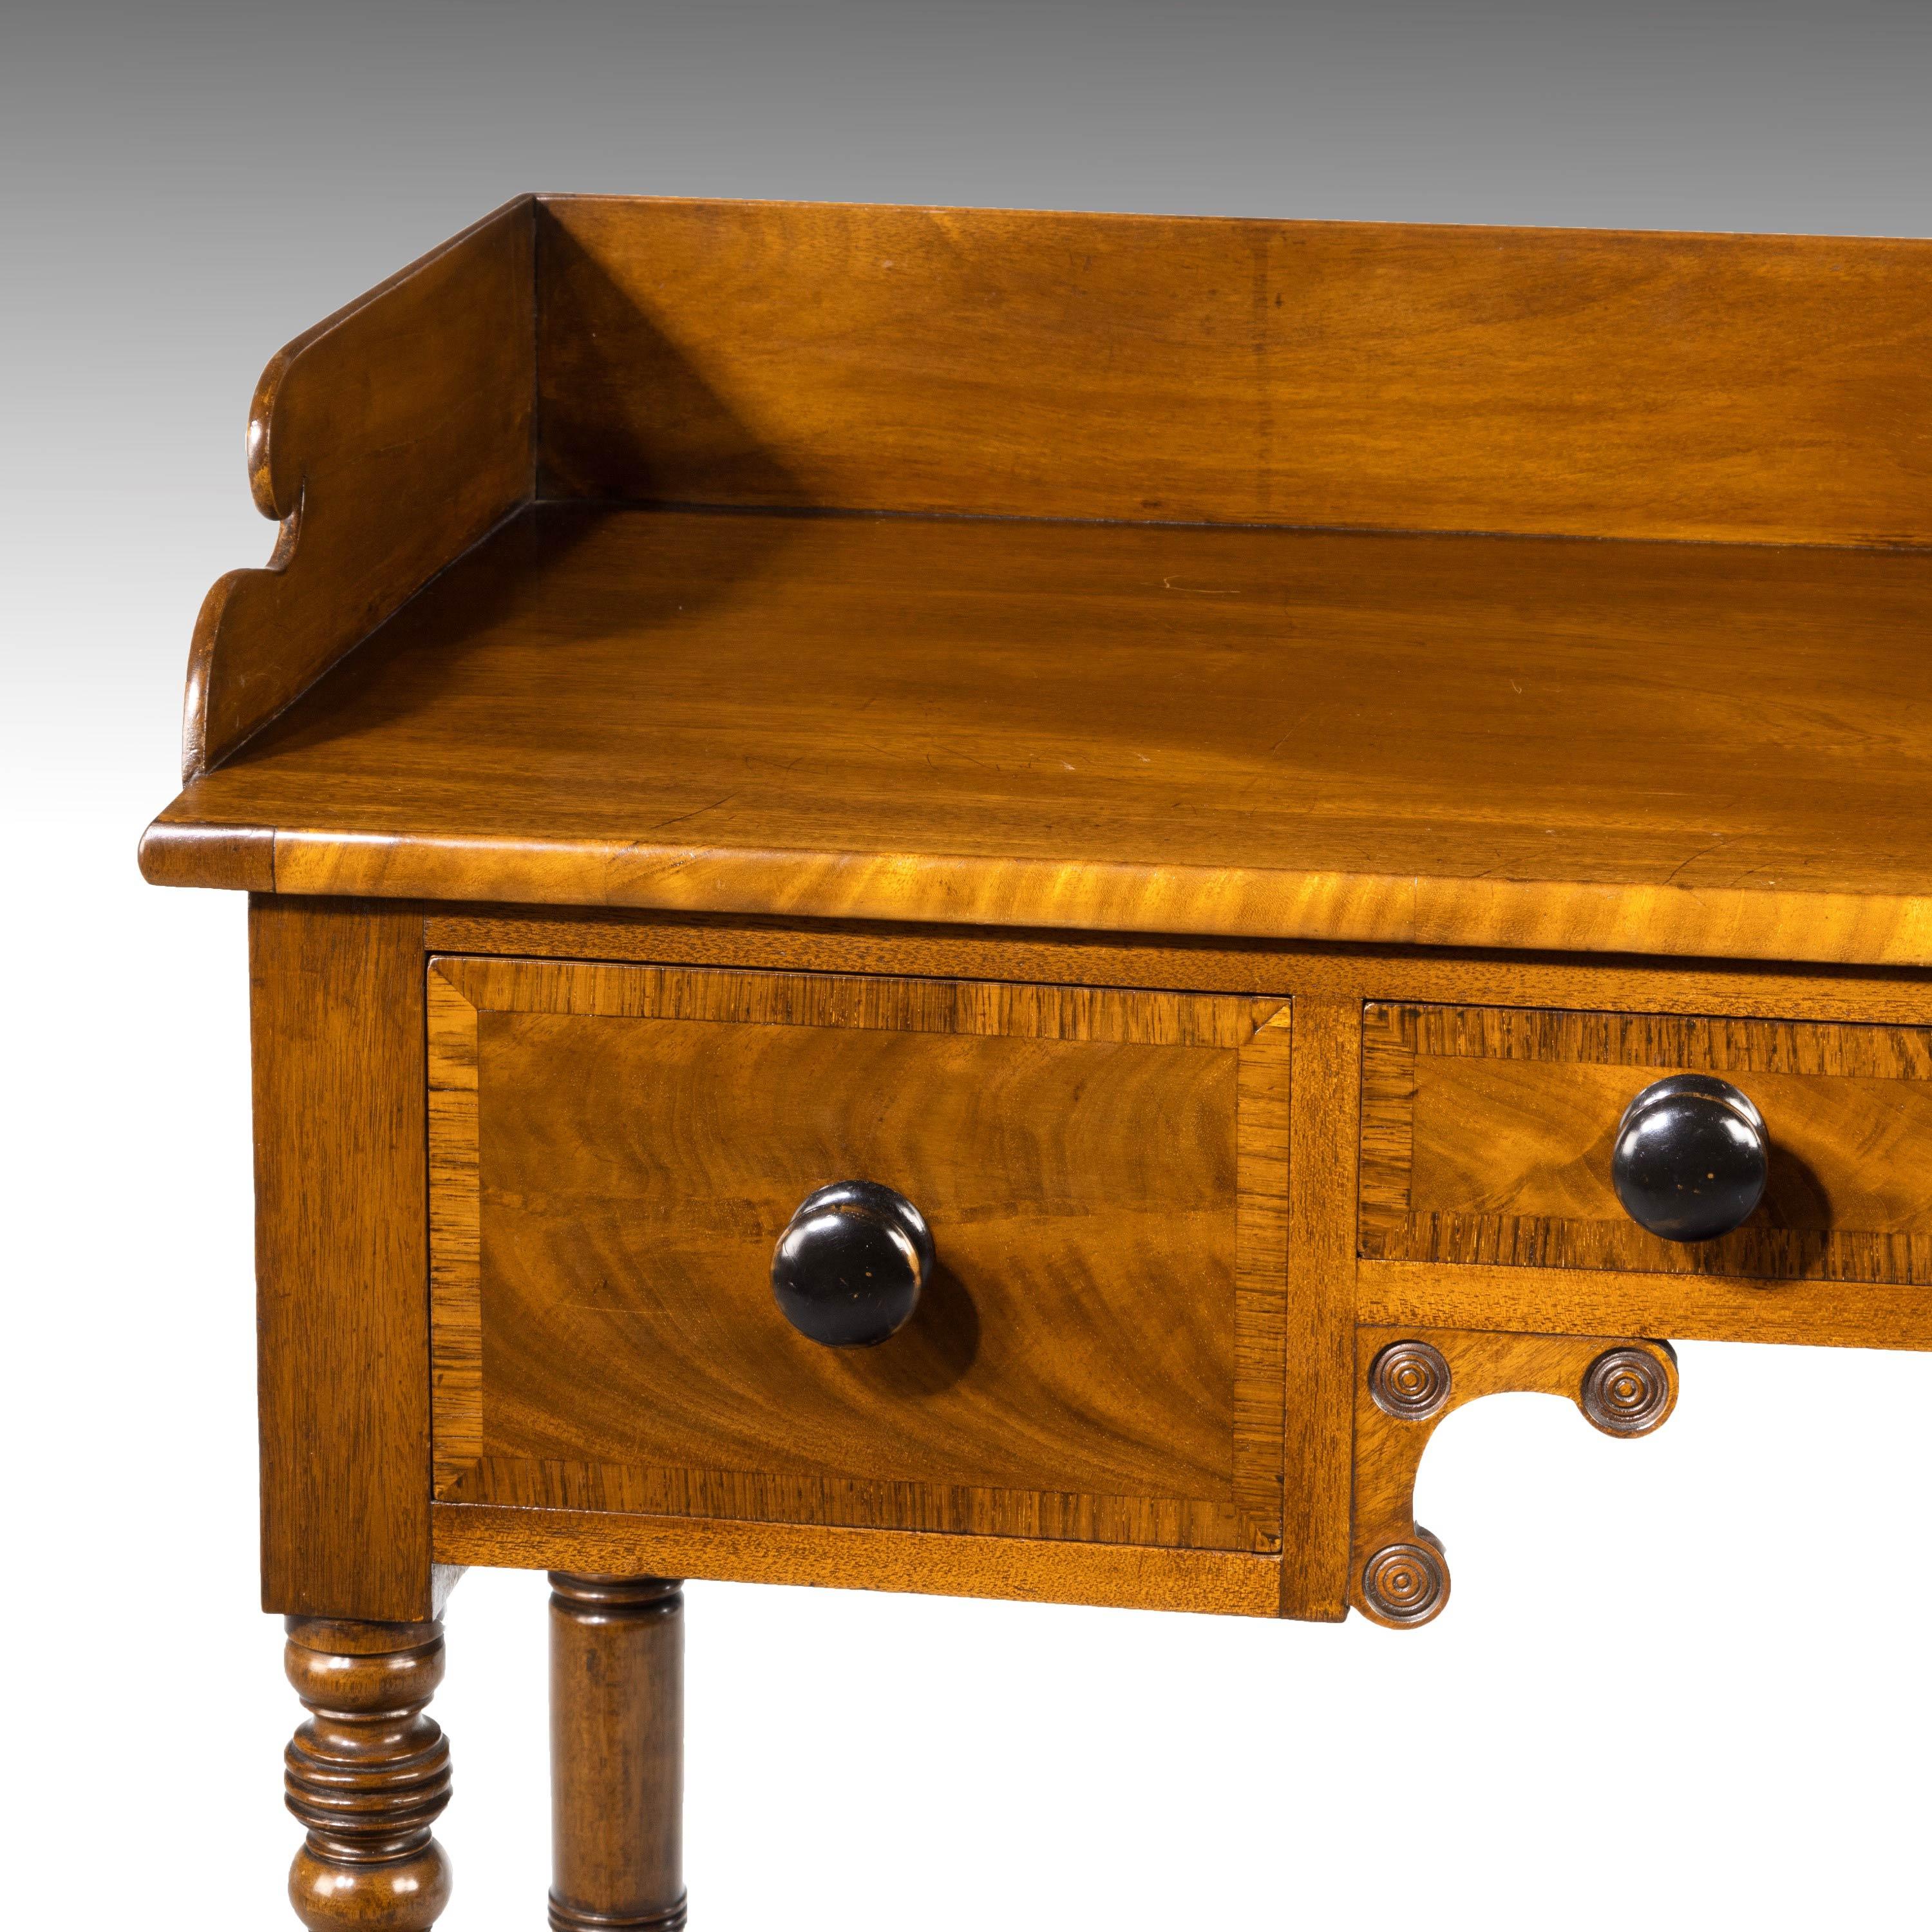 English William IV Period Side or Serving Table in the Manner of Gillows